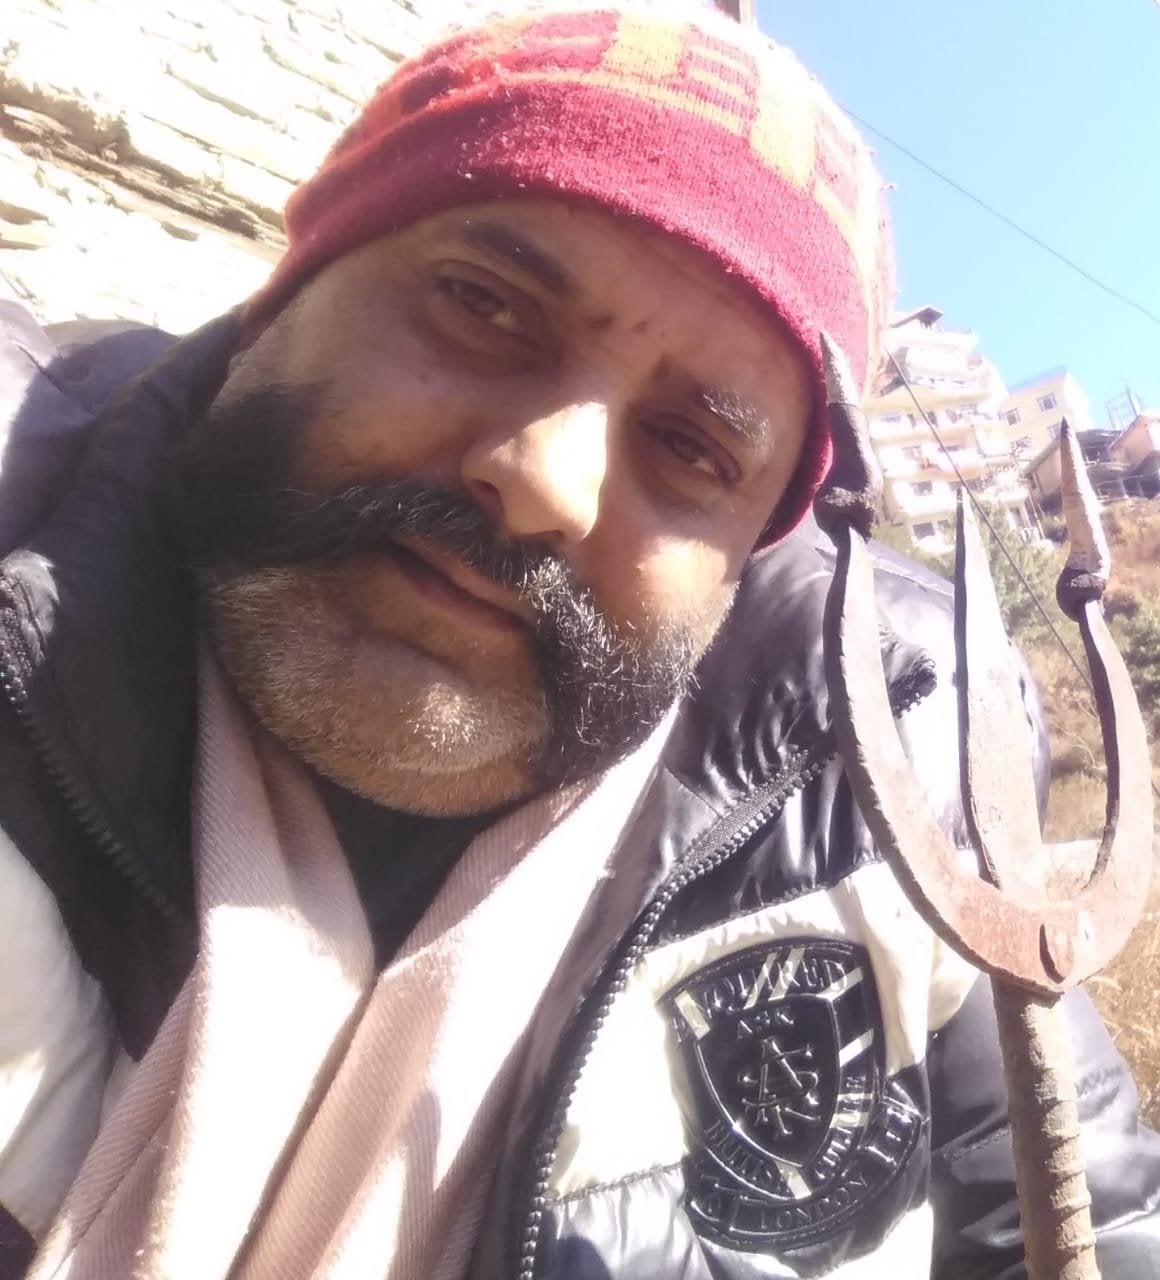 ANI on Twitter: Himachal Pradesh: Ravi Kumar, from Shimla has written to President Kovind to appoint him as temporary executioner in Delhi’s Tihar Jail as there is no executioner there.He states, “Appoint me executioner so ‘Nirbhaya’ case convicts can be hanged soon & her soul rests in peace “.